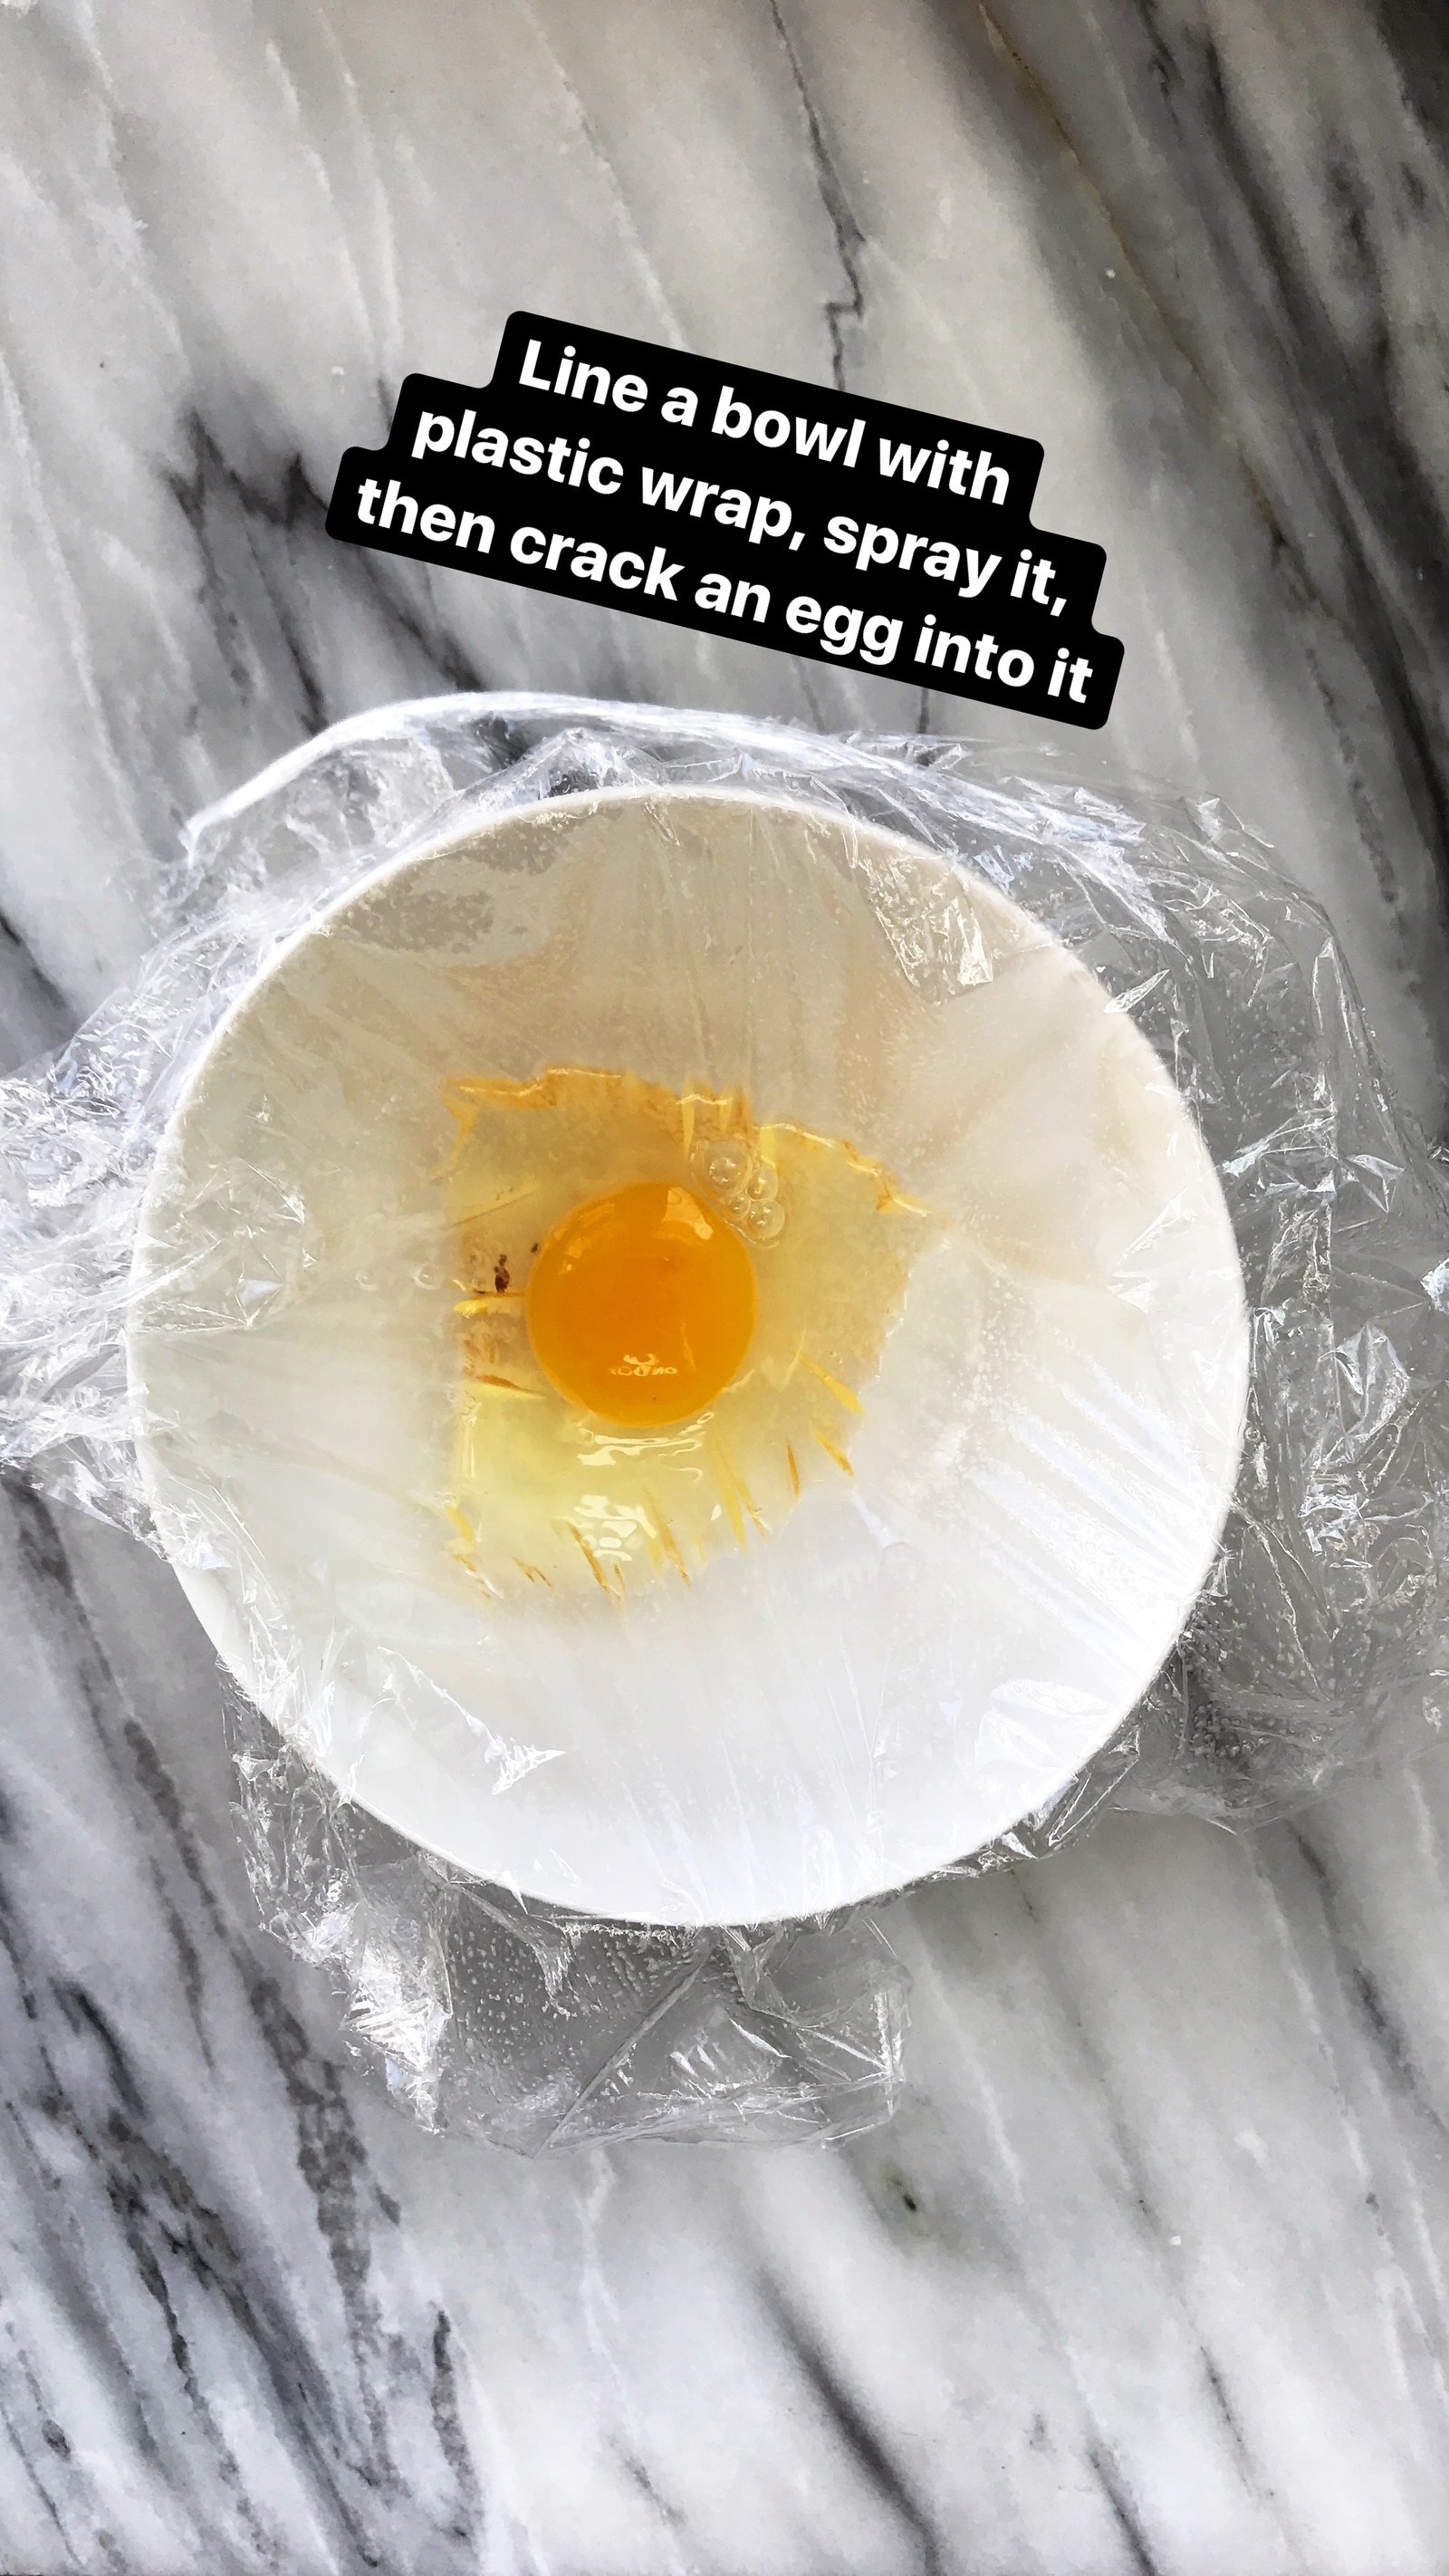 An egg in a bowl lined with plastic wrap